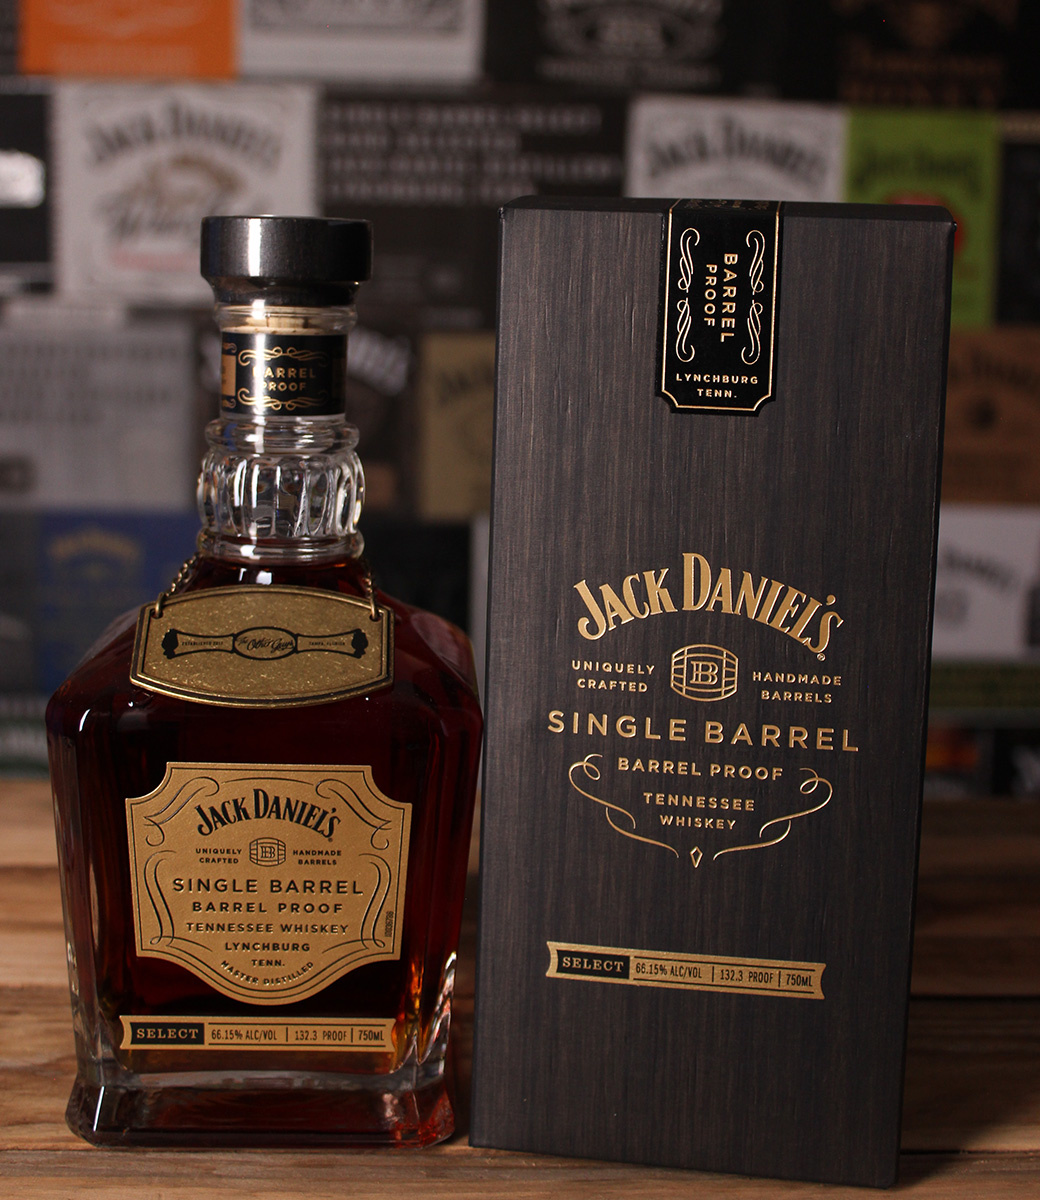 JACK DANIEL'S  - Single Barrel - Barrel Proof - Personal Collection - The Other Guys - Tampa Floriada - 4.30.19